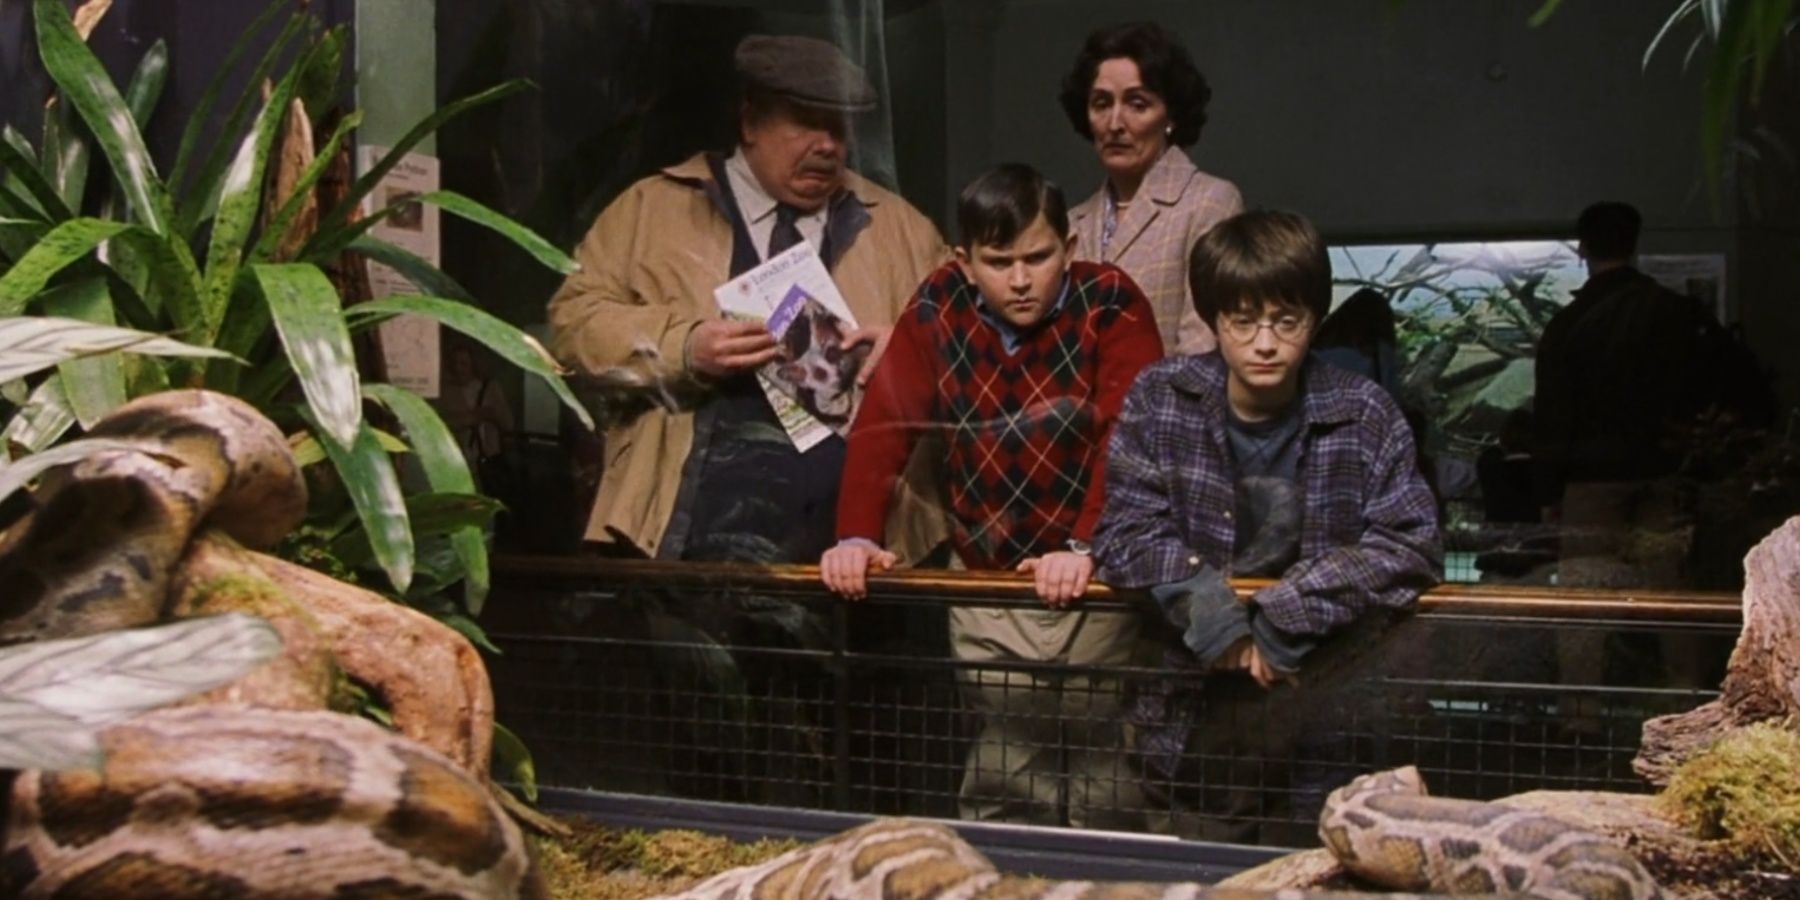 Vernon, Petunia and Dudley Dursley and Harry at the Zoo in Harry Potter.